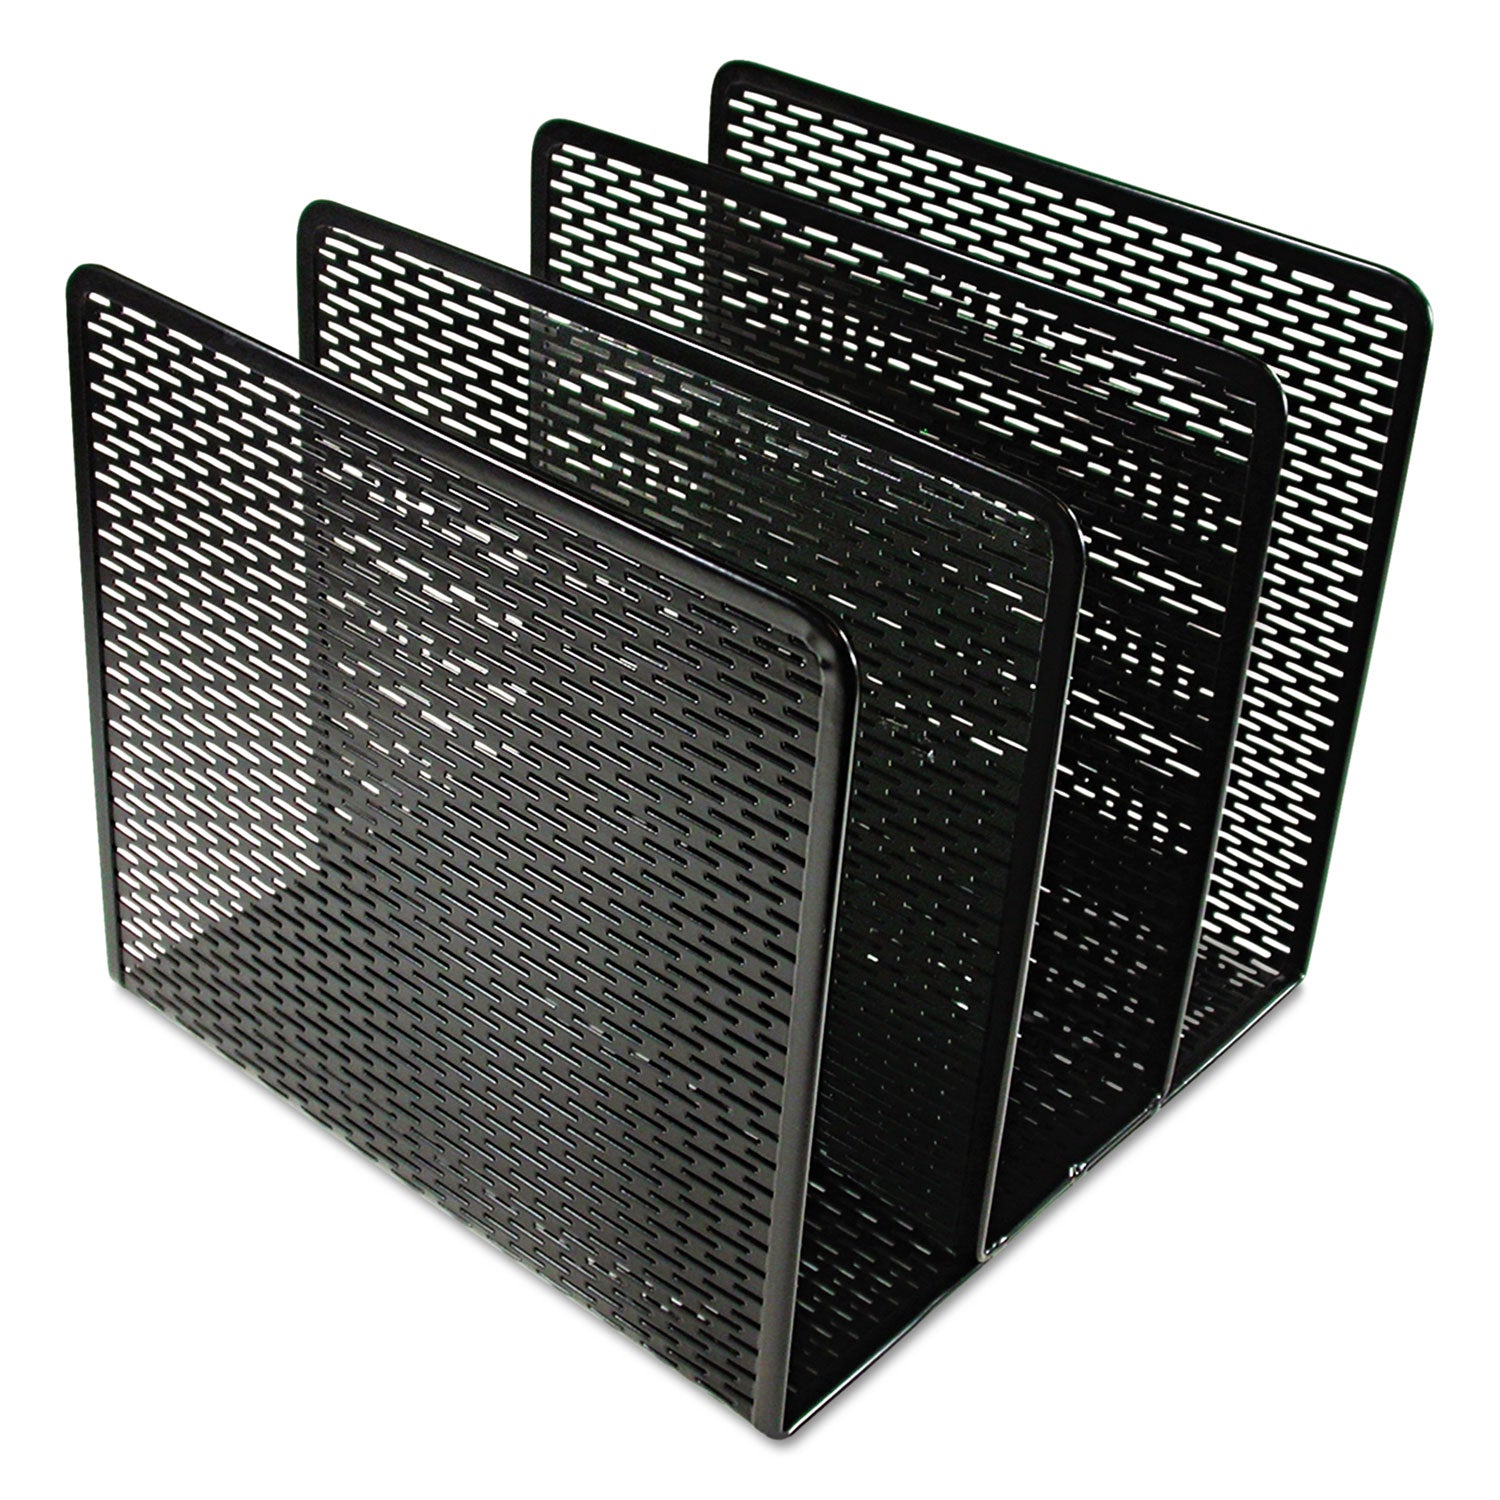 Urban Collection Punched Metal File Sorter, 3 Sections, Letter Size Files, 8" x 8" x 7.25", Black - 